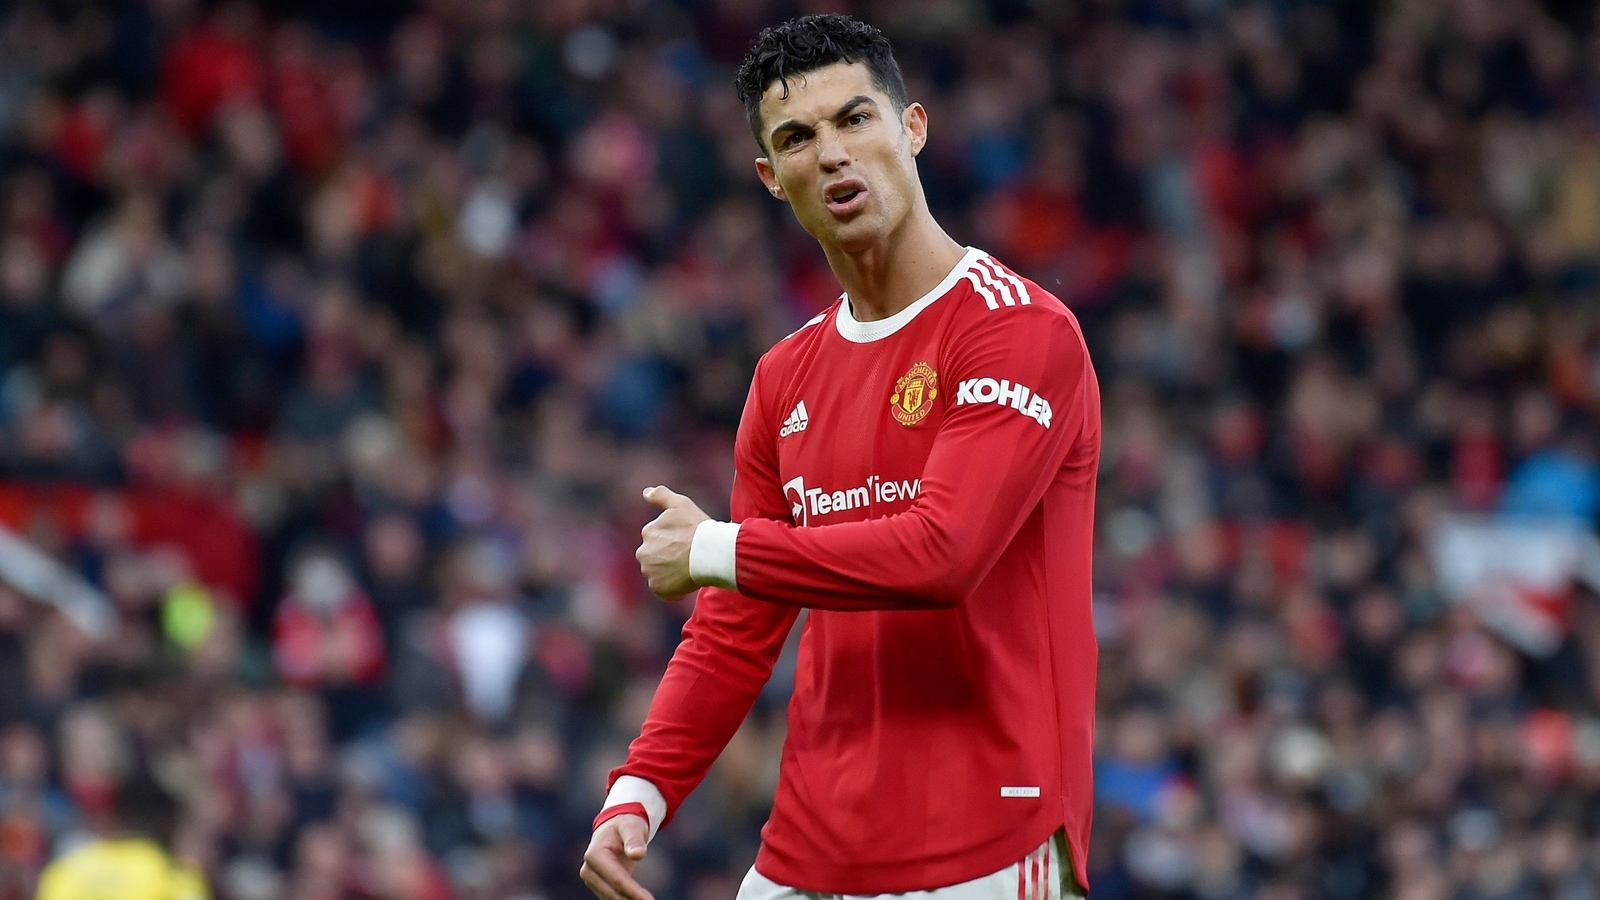 Former Manchester United player reveals Cristiano Ronaldo is ignoring his calls amid exit rumours